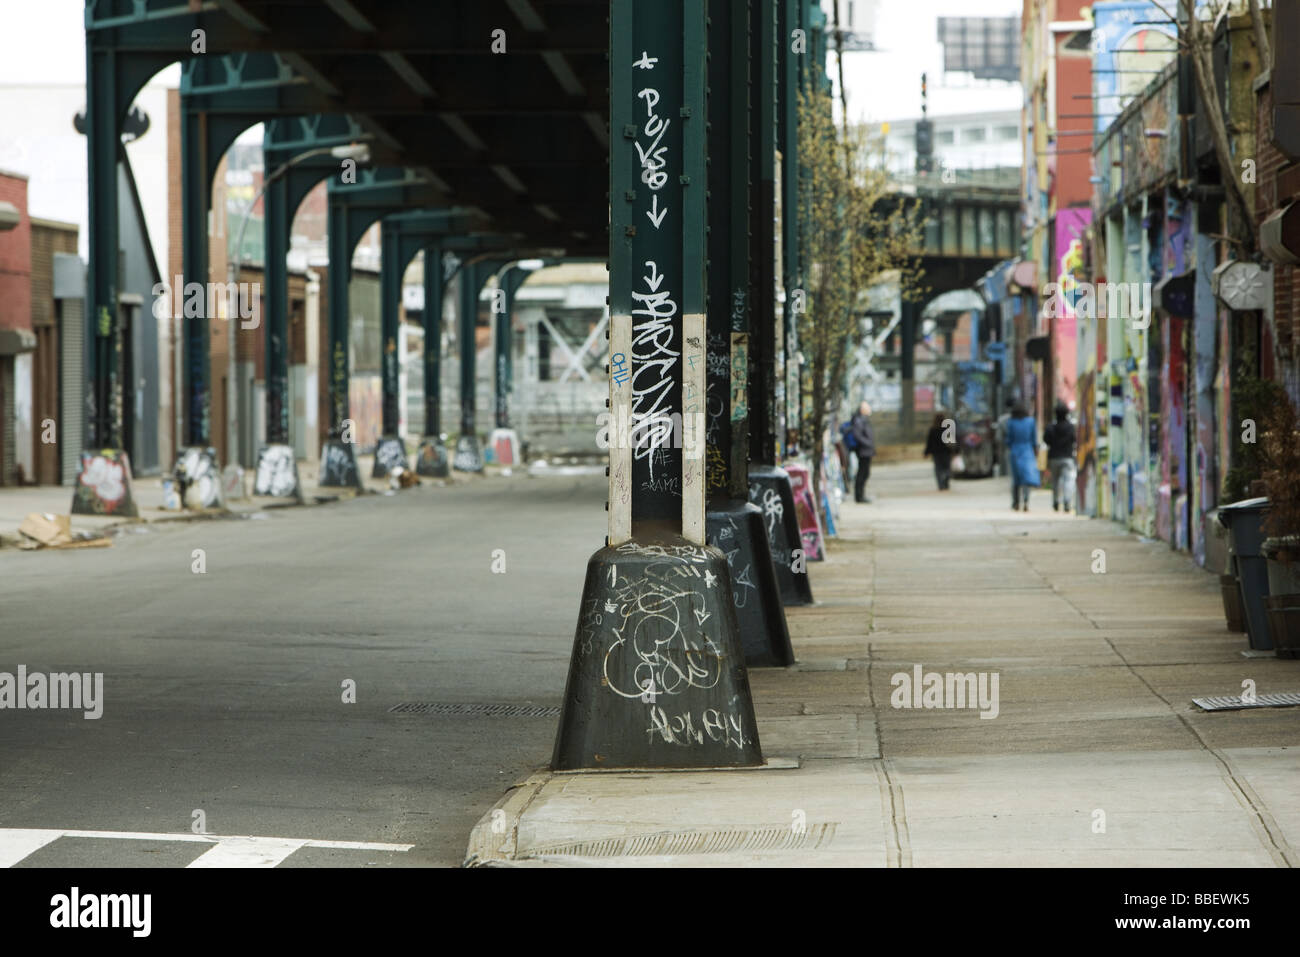 Graffiti on support column of elevated road Stock Photo